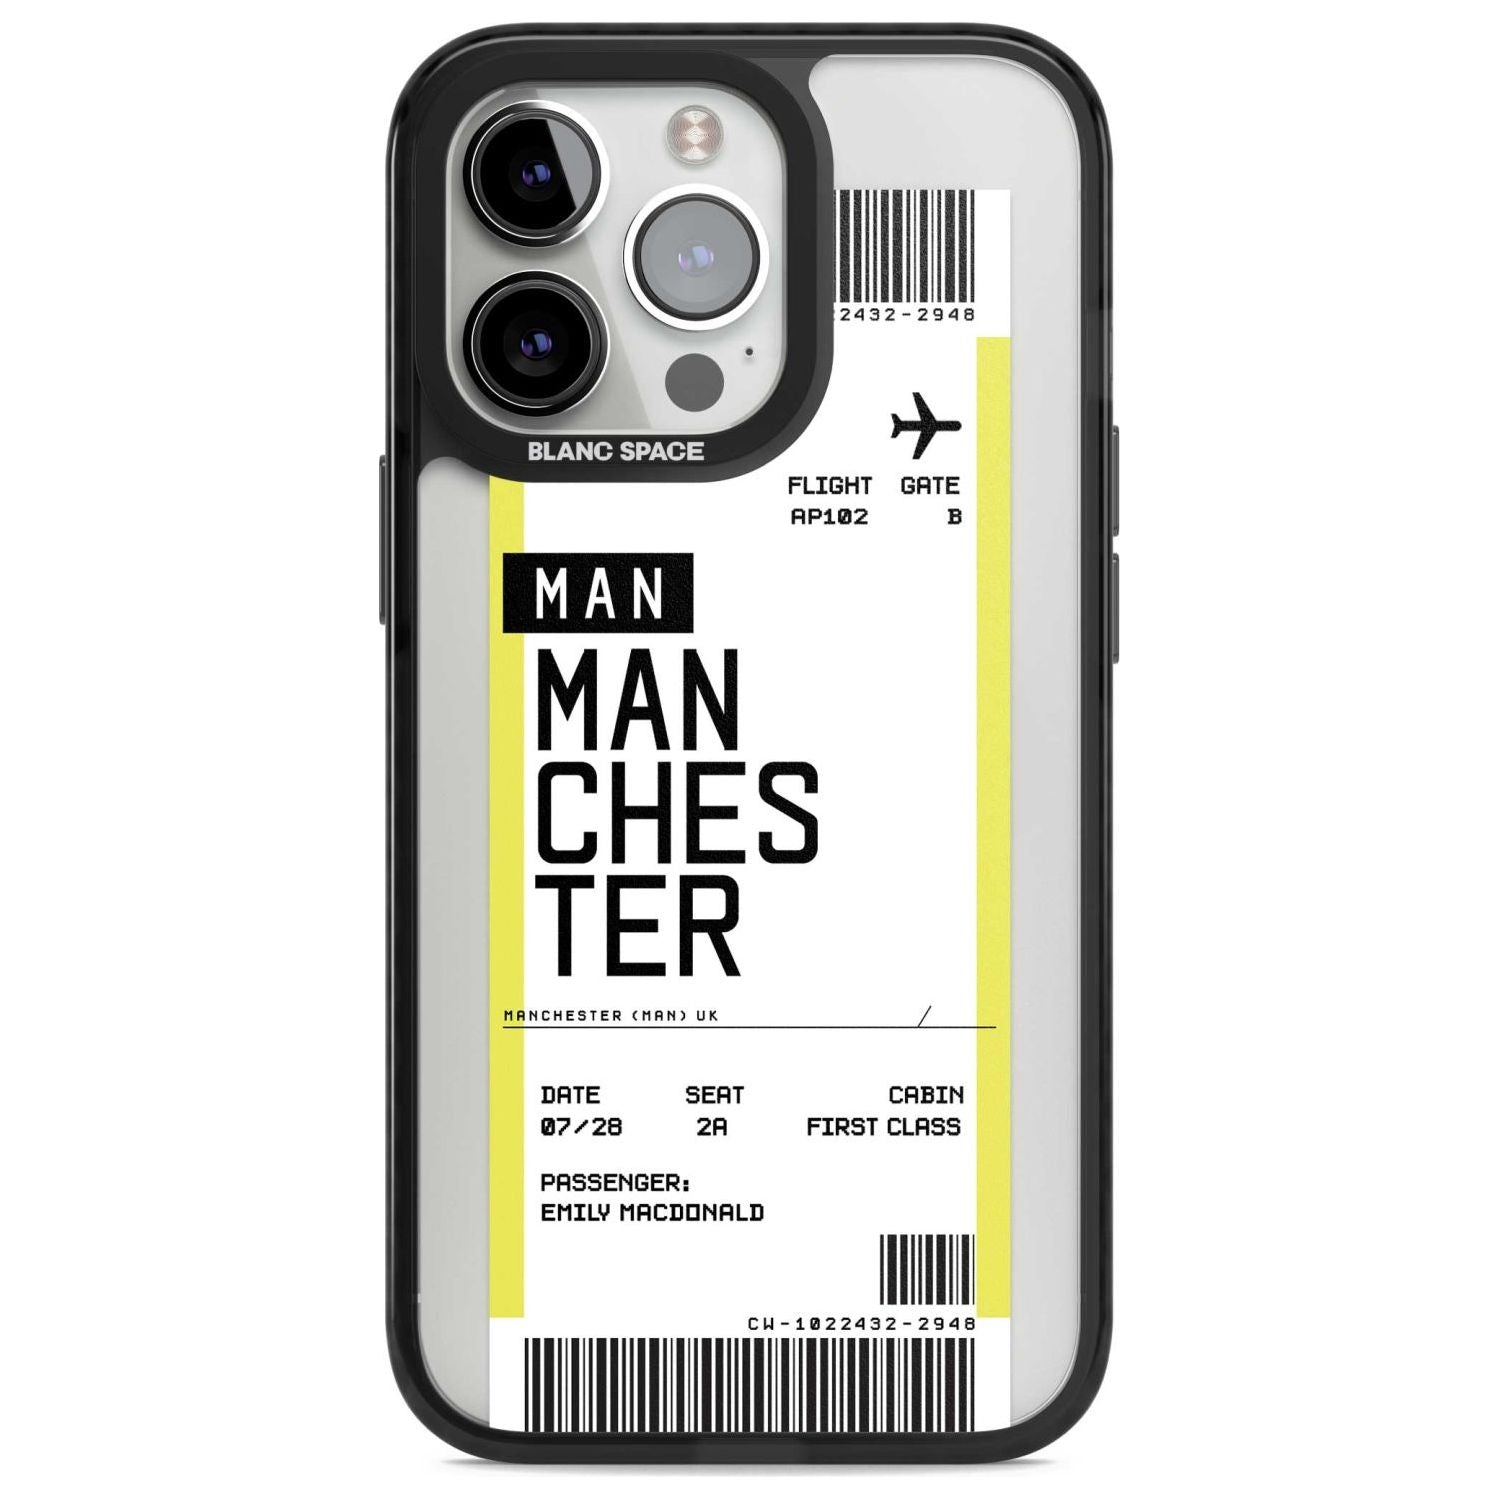 Personalised Manchester Boarding Pass Custom Phone Case iPhone 15 Pro Max / Magsafe Black Impact Case,iPhone 15 Pro / Magsafe Black Impact Case,iPhone 14 Pro Max / Magsafe Black Impact Case,iPhone 14 Pro / Magsafe Black Impact Case,iPhone 13 Pro / Magsafe Black Impact Case Blanc Space